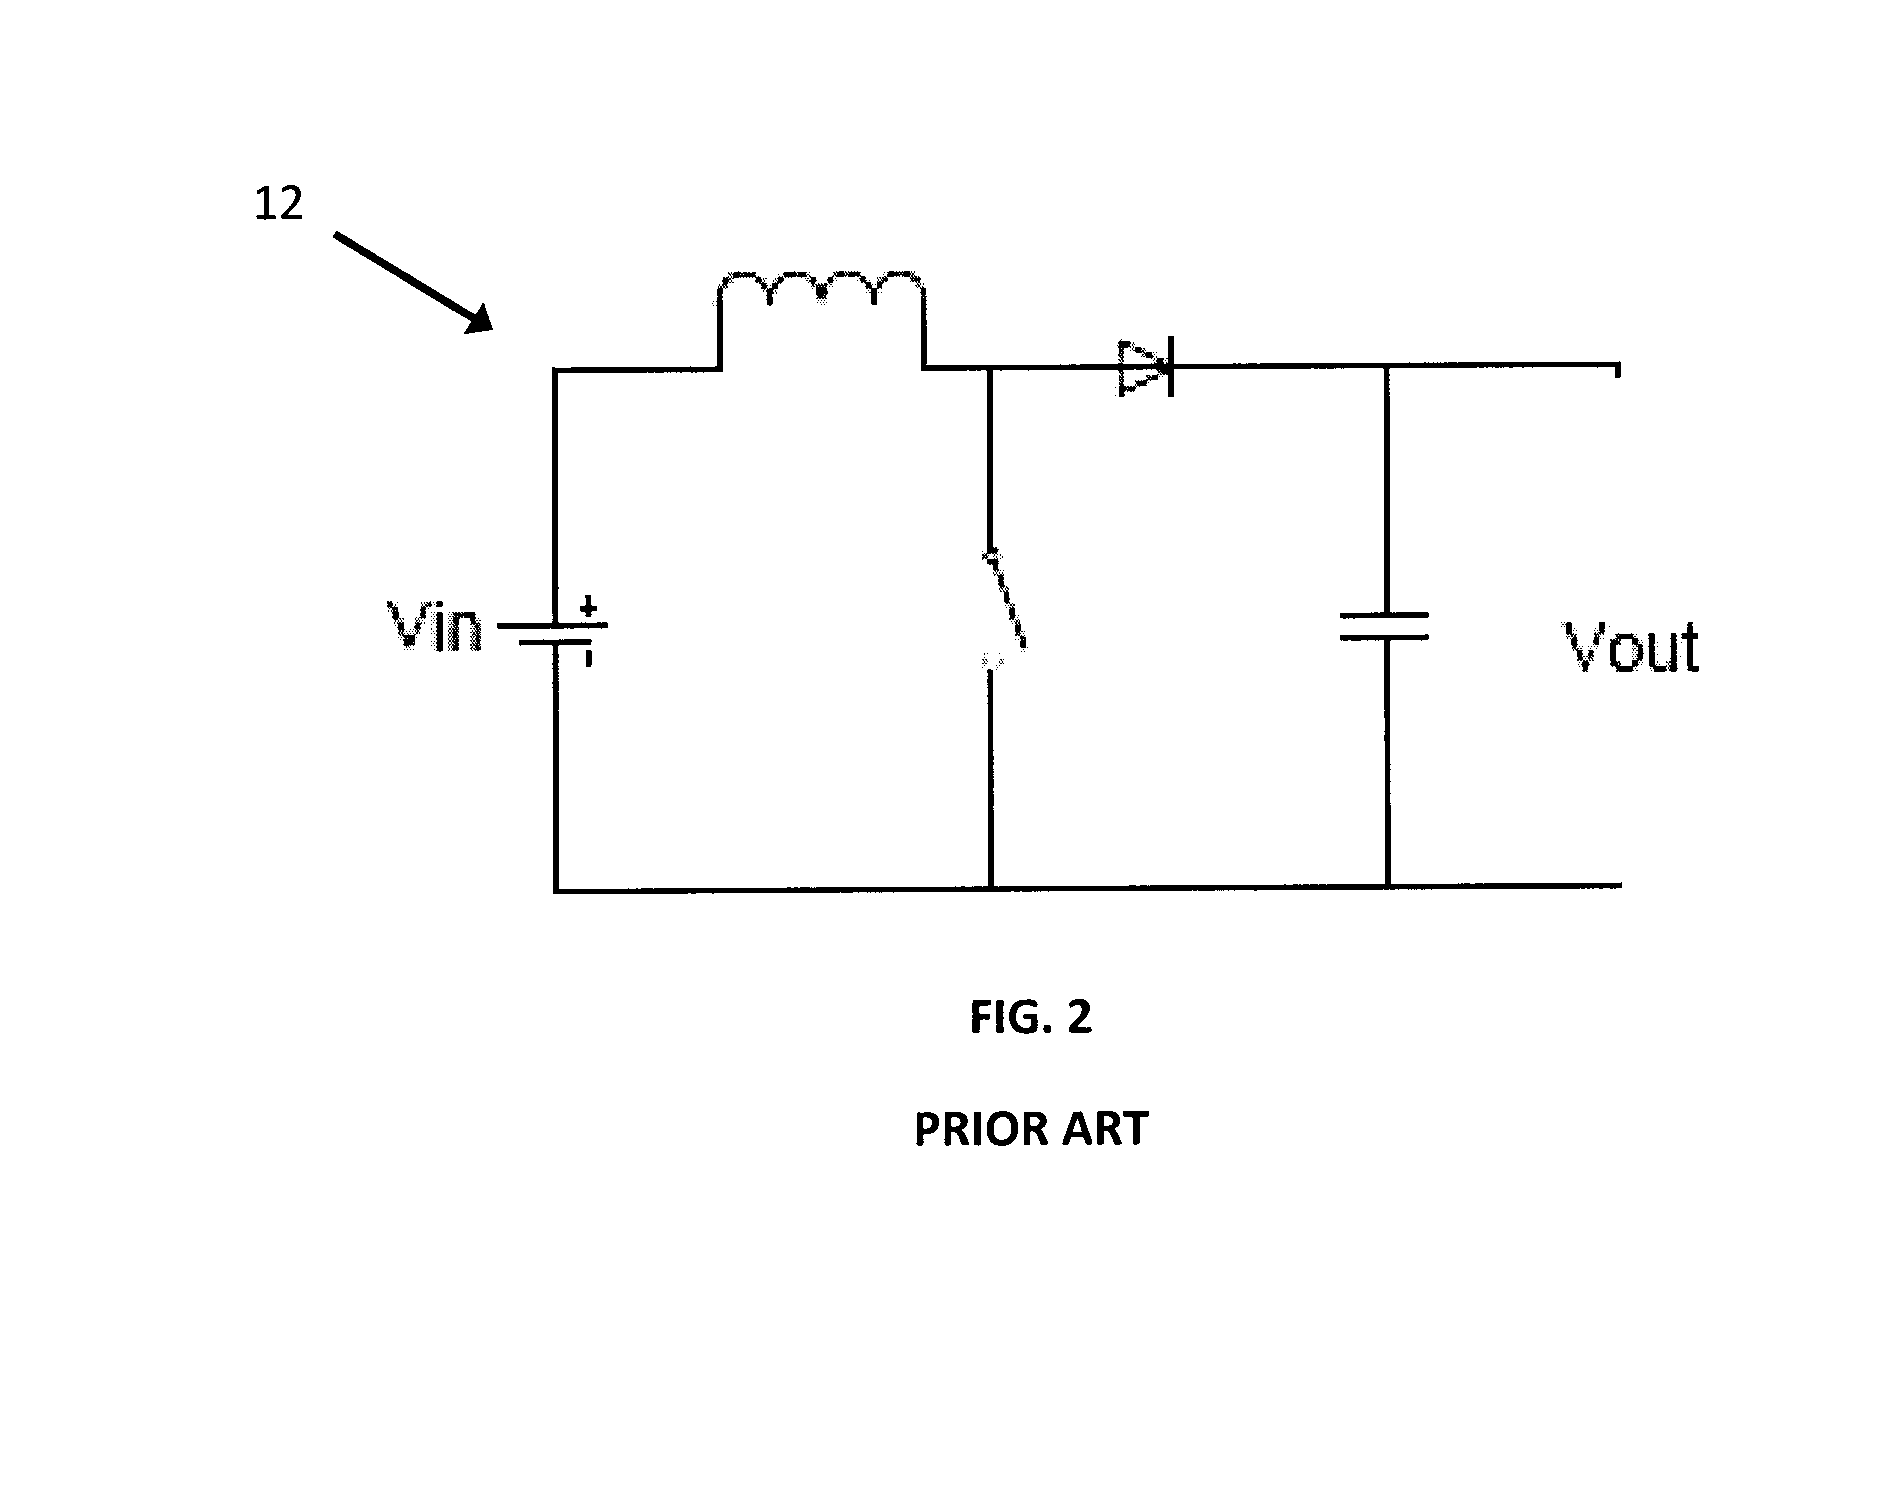 Dc-dc converter circuit using an llc circuit in the region of voltage gain above unity